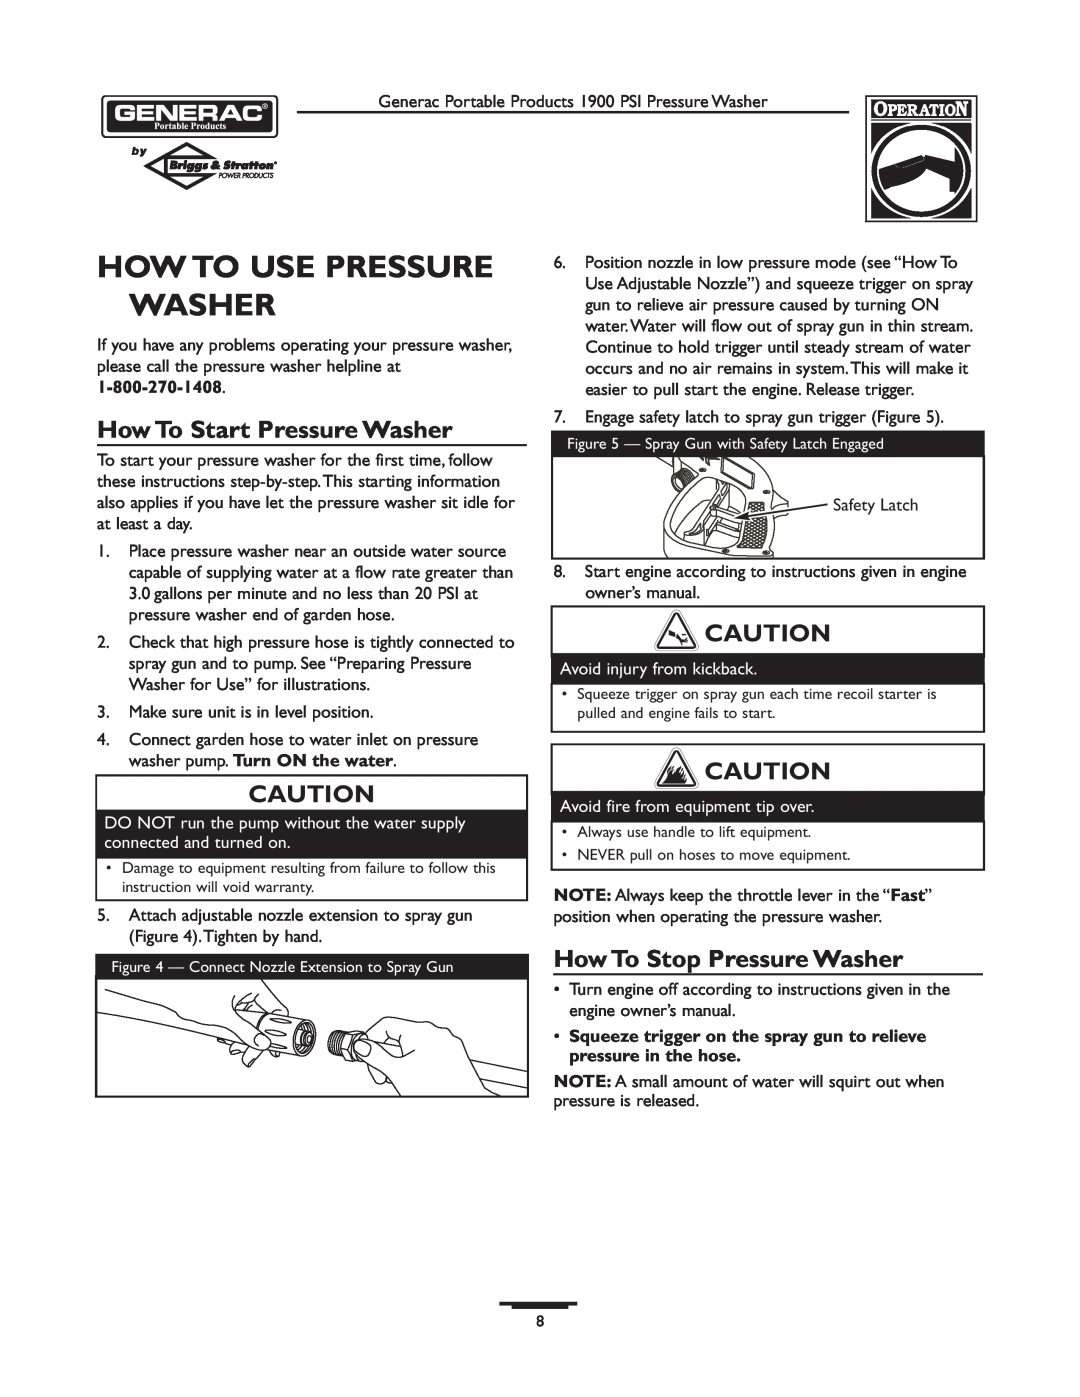 Briggs & Stratton 1900PSI How To Use Pressure Washer, How To Start Pressure Washer, How To Stop Pressure Washer 